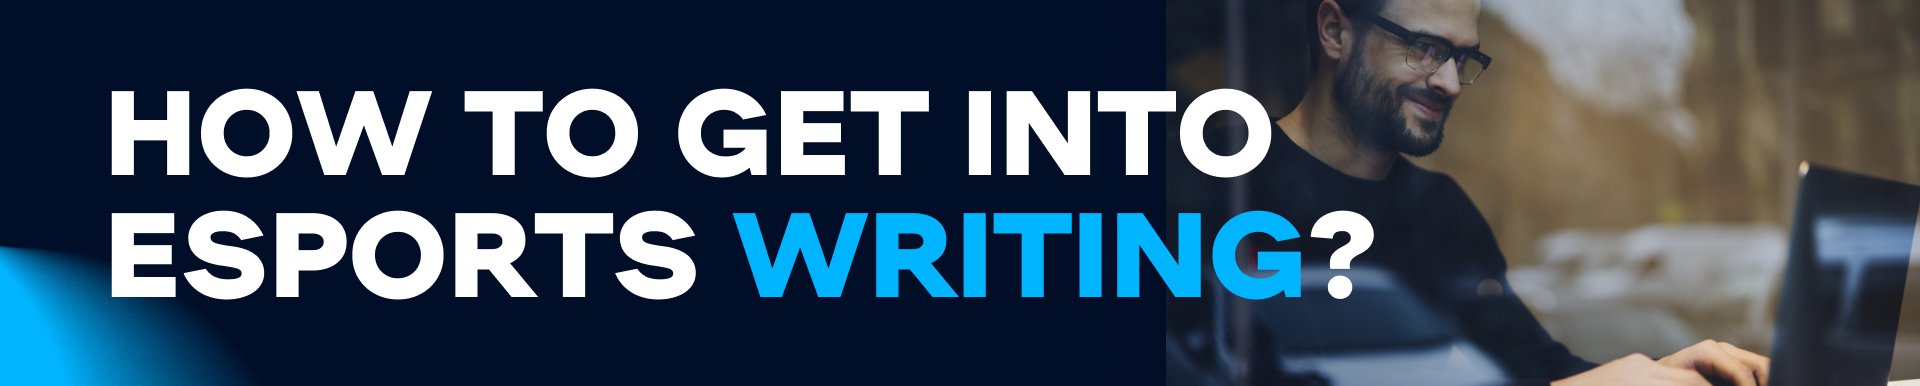 How to Get into Esports Writing? Image: WePlay Holding